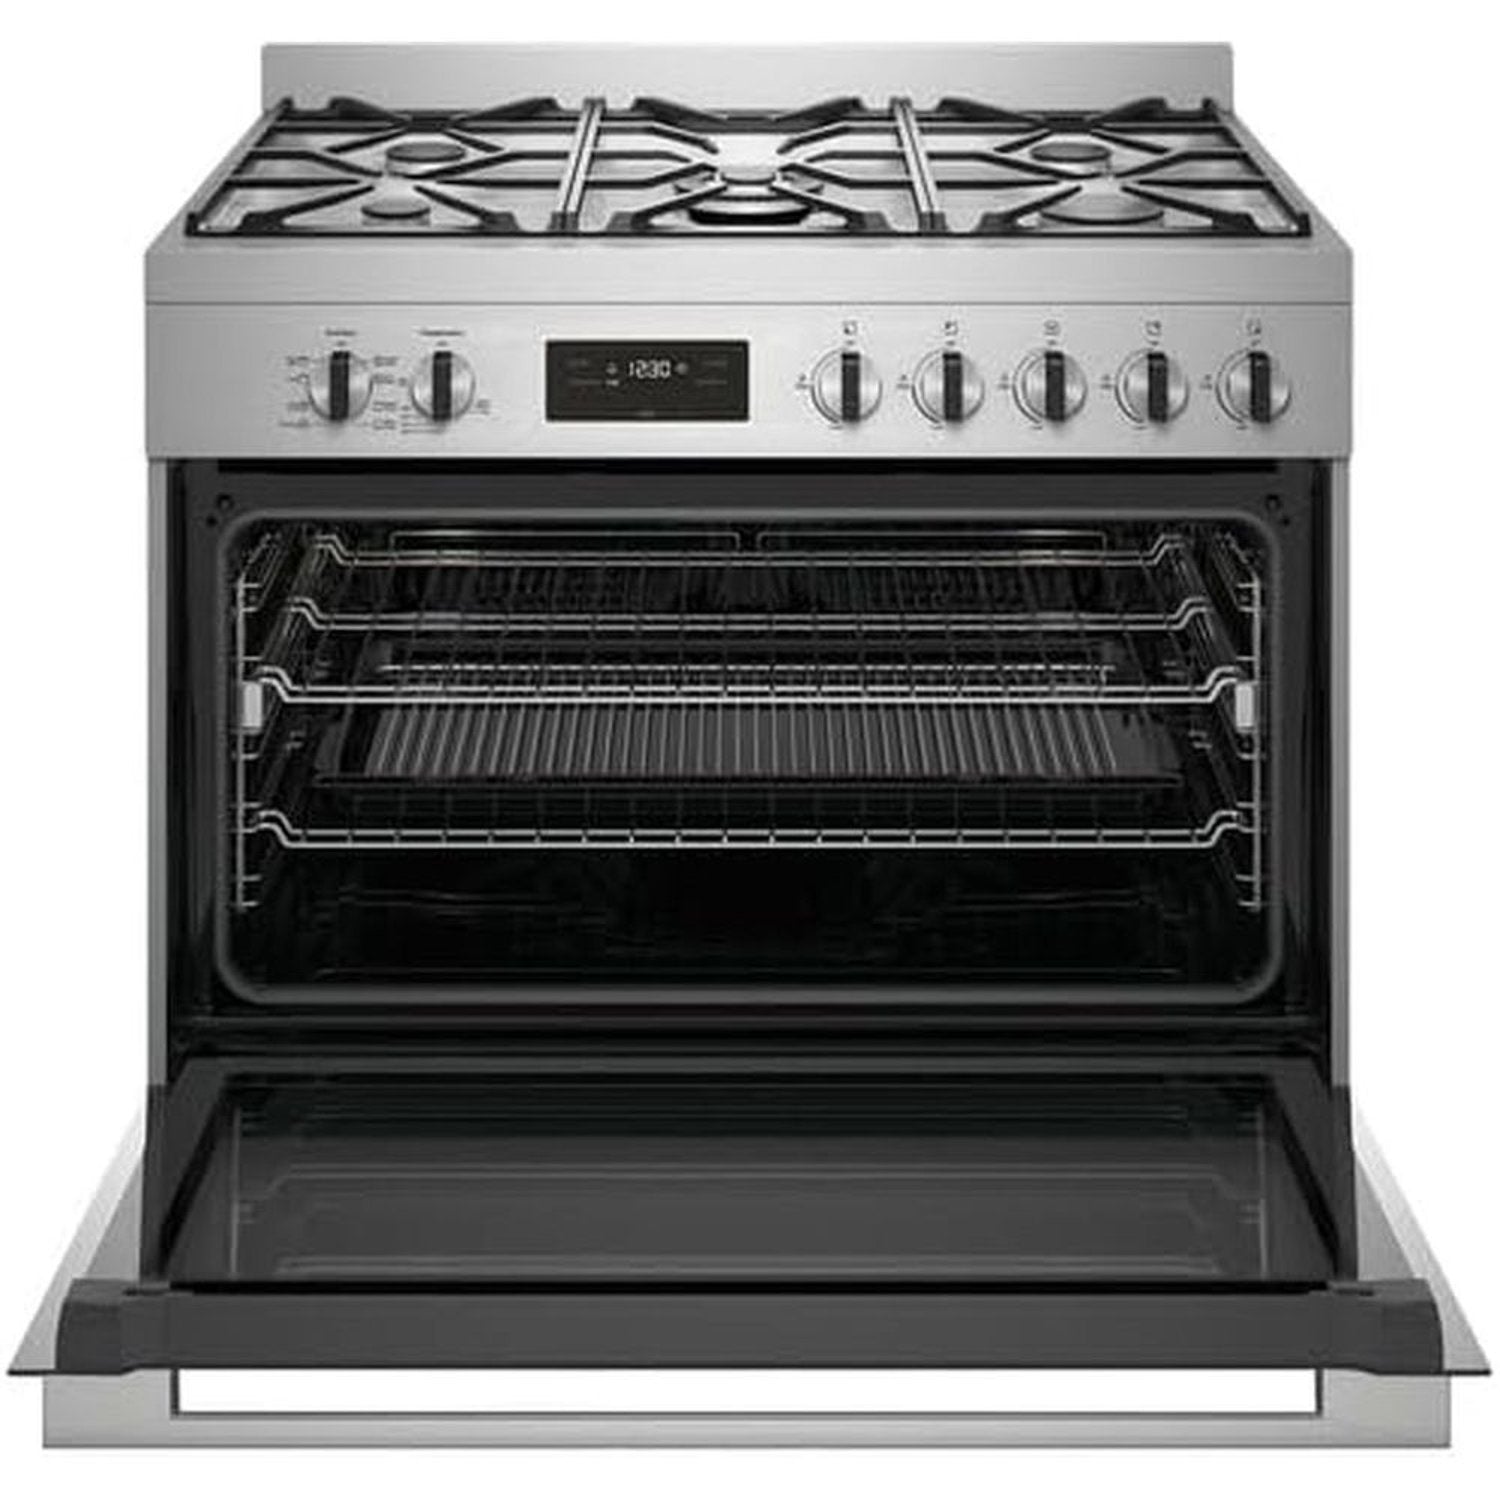 Electrolux 90cm Freestanding Cooker with Gas Hob and 116L Large Capacity Electric Oven, Dual Fans, Cast Iron Pan Supports, Stainless Steel